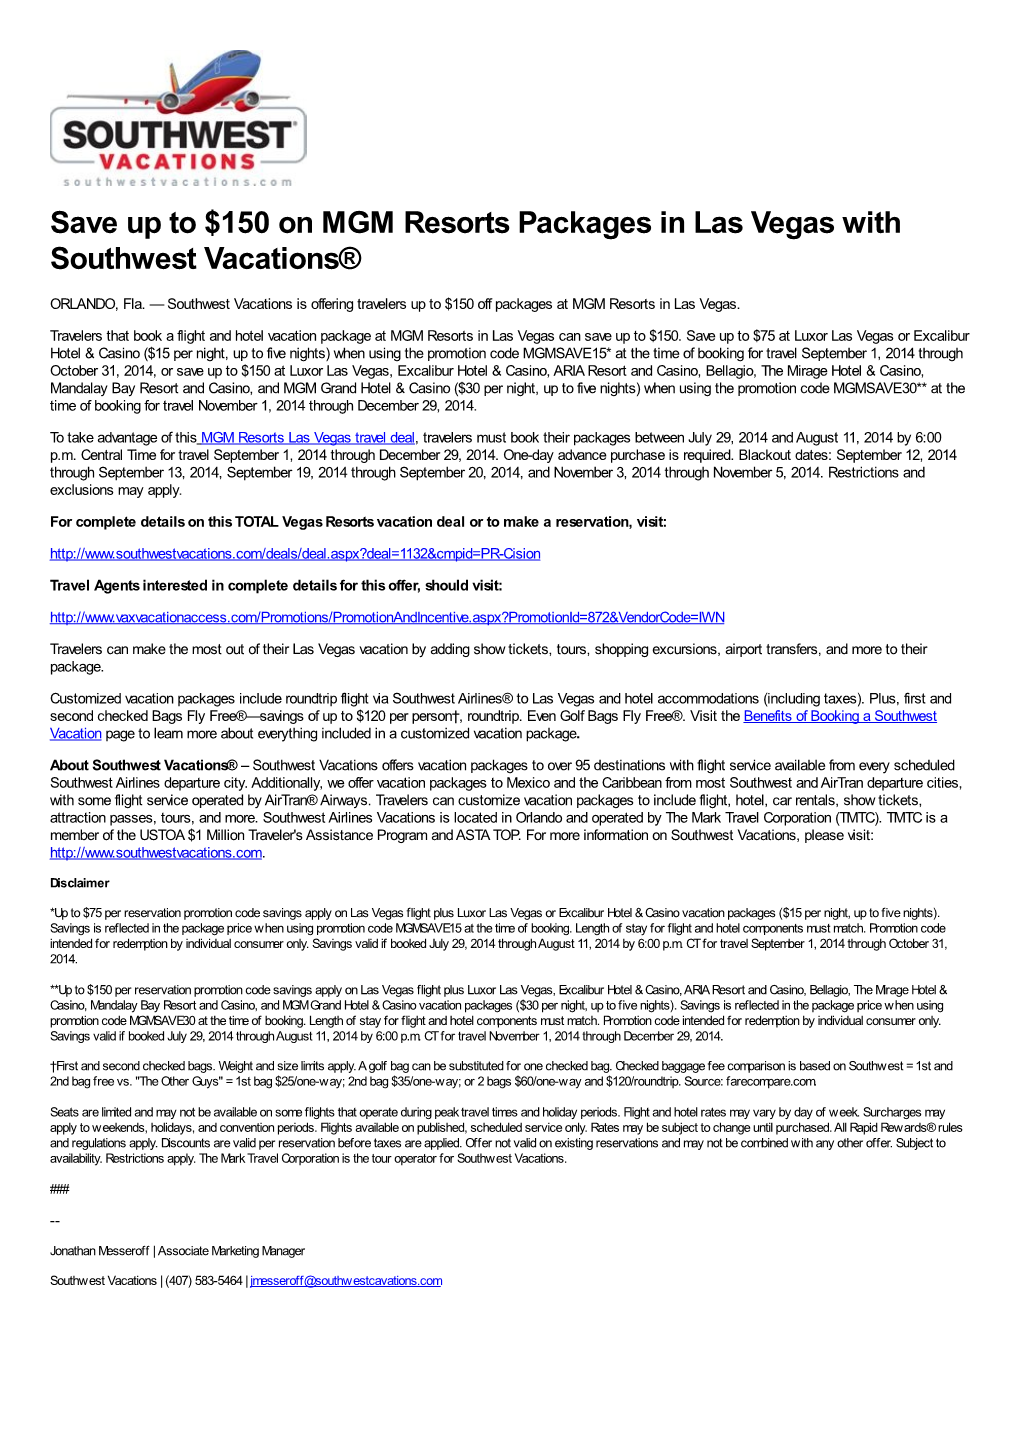 Save up to $150 on MGM Resorts Packages in Las Vegas with Southwest Vacations®